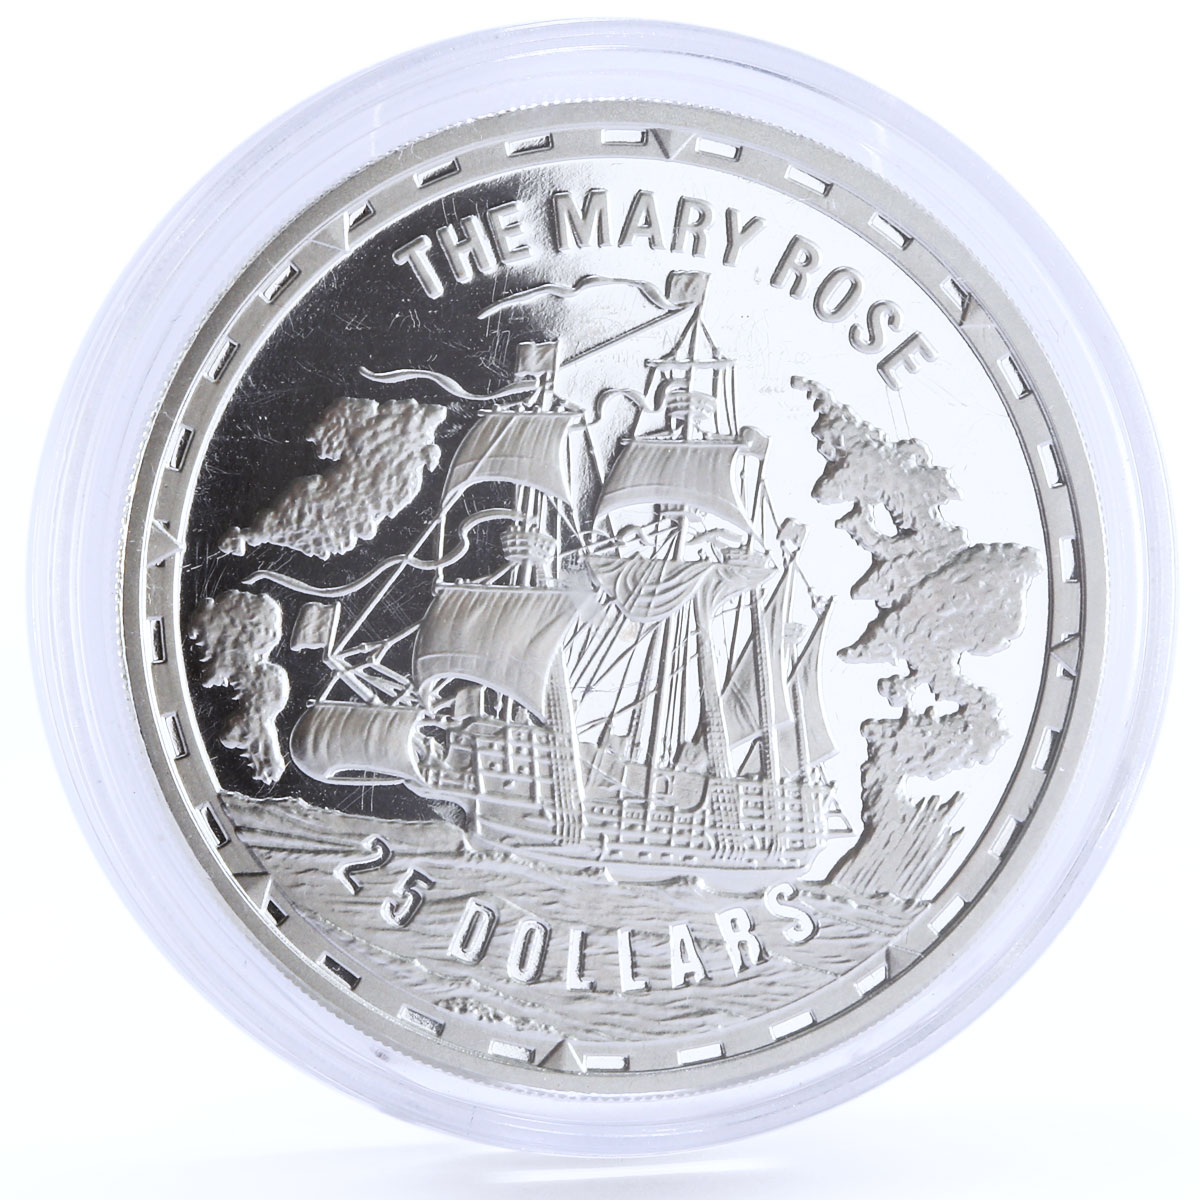 Solomon Islands 25 dollars Legendary Warships series Mary Rose silver coin 2005